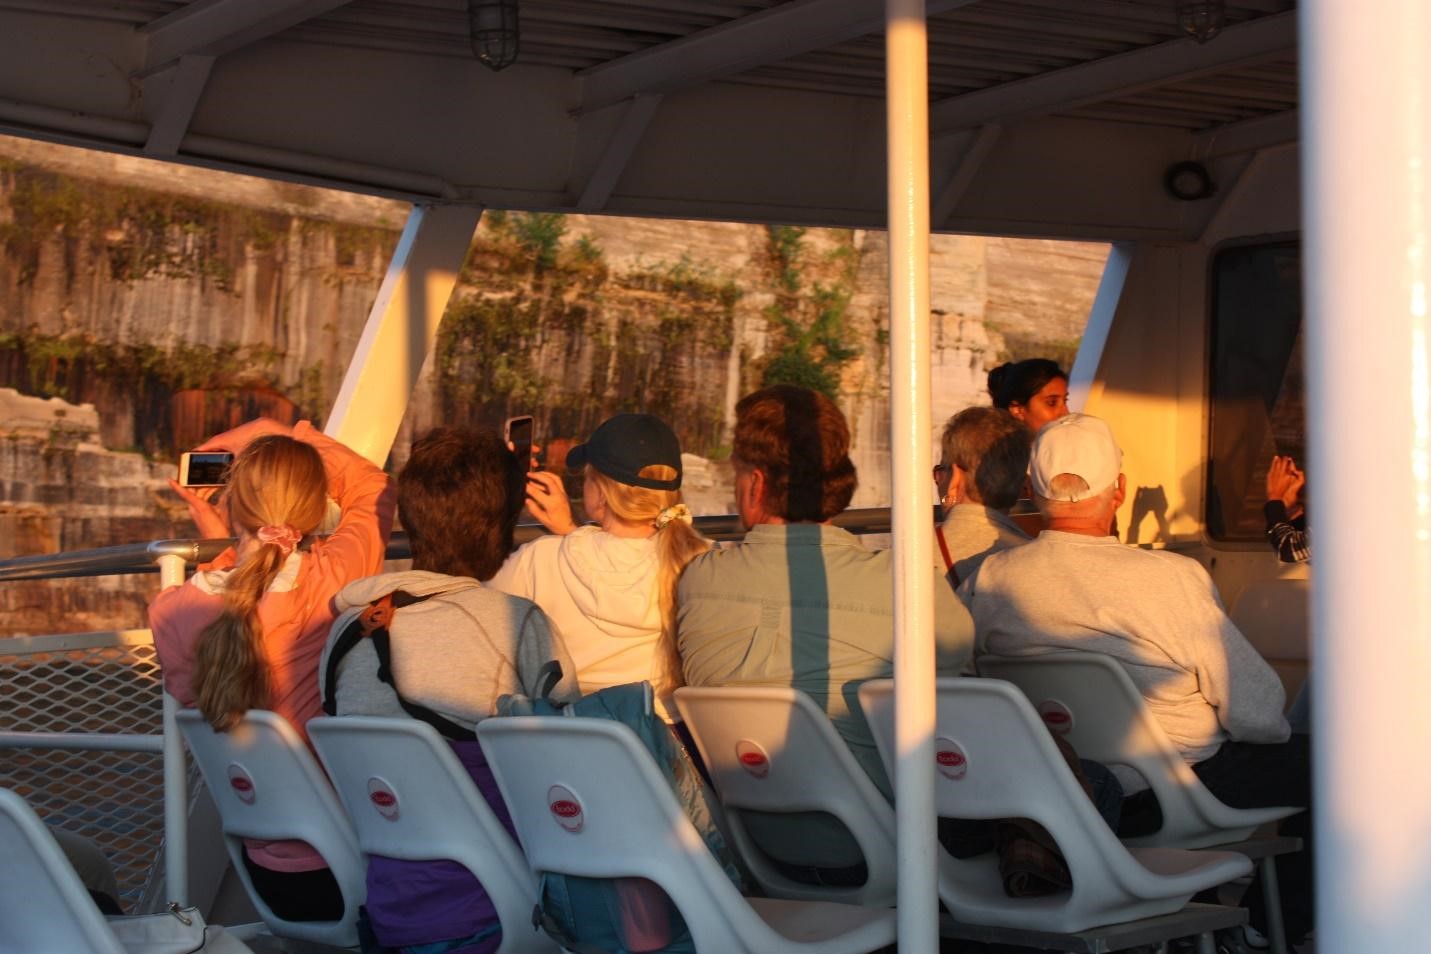 The Sunset Cruise offers passengers plenty of chances to take photos.